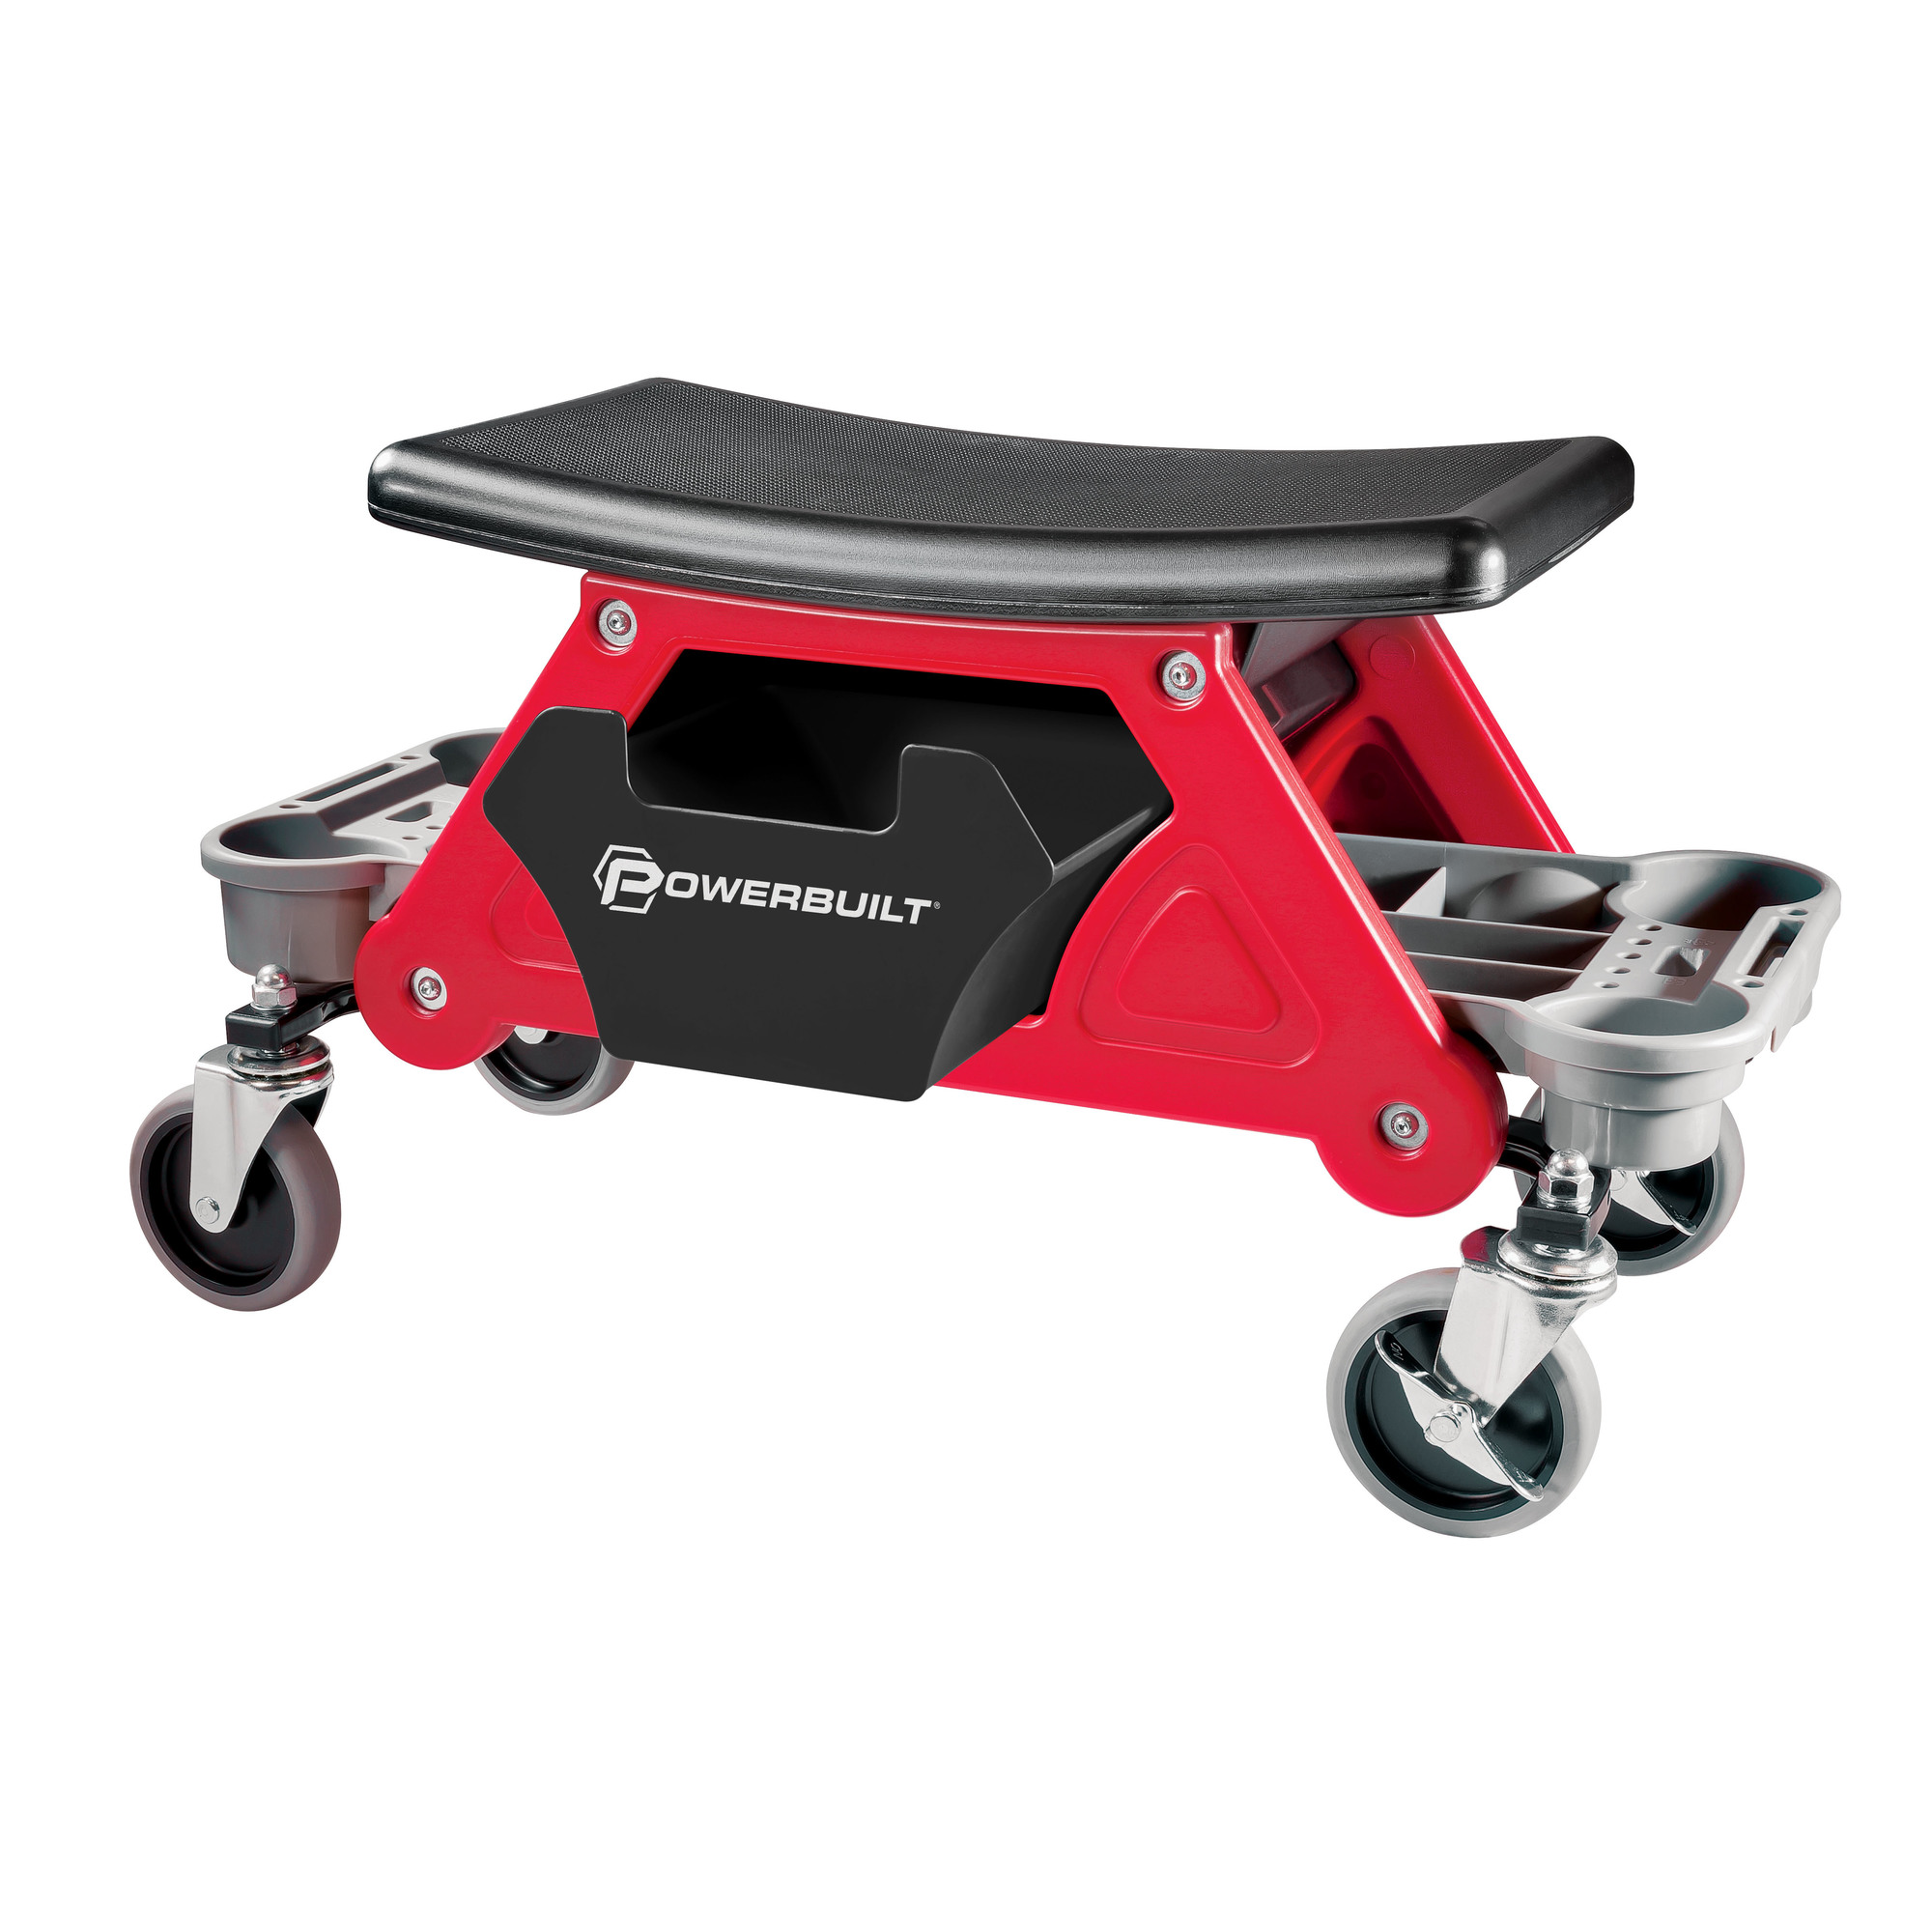 Powerbuilt, Heavy Duty Rolling Work Seat with Storage Trays, Capacity 300 lb, Max. Height 11.12 in, Model 240036